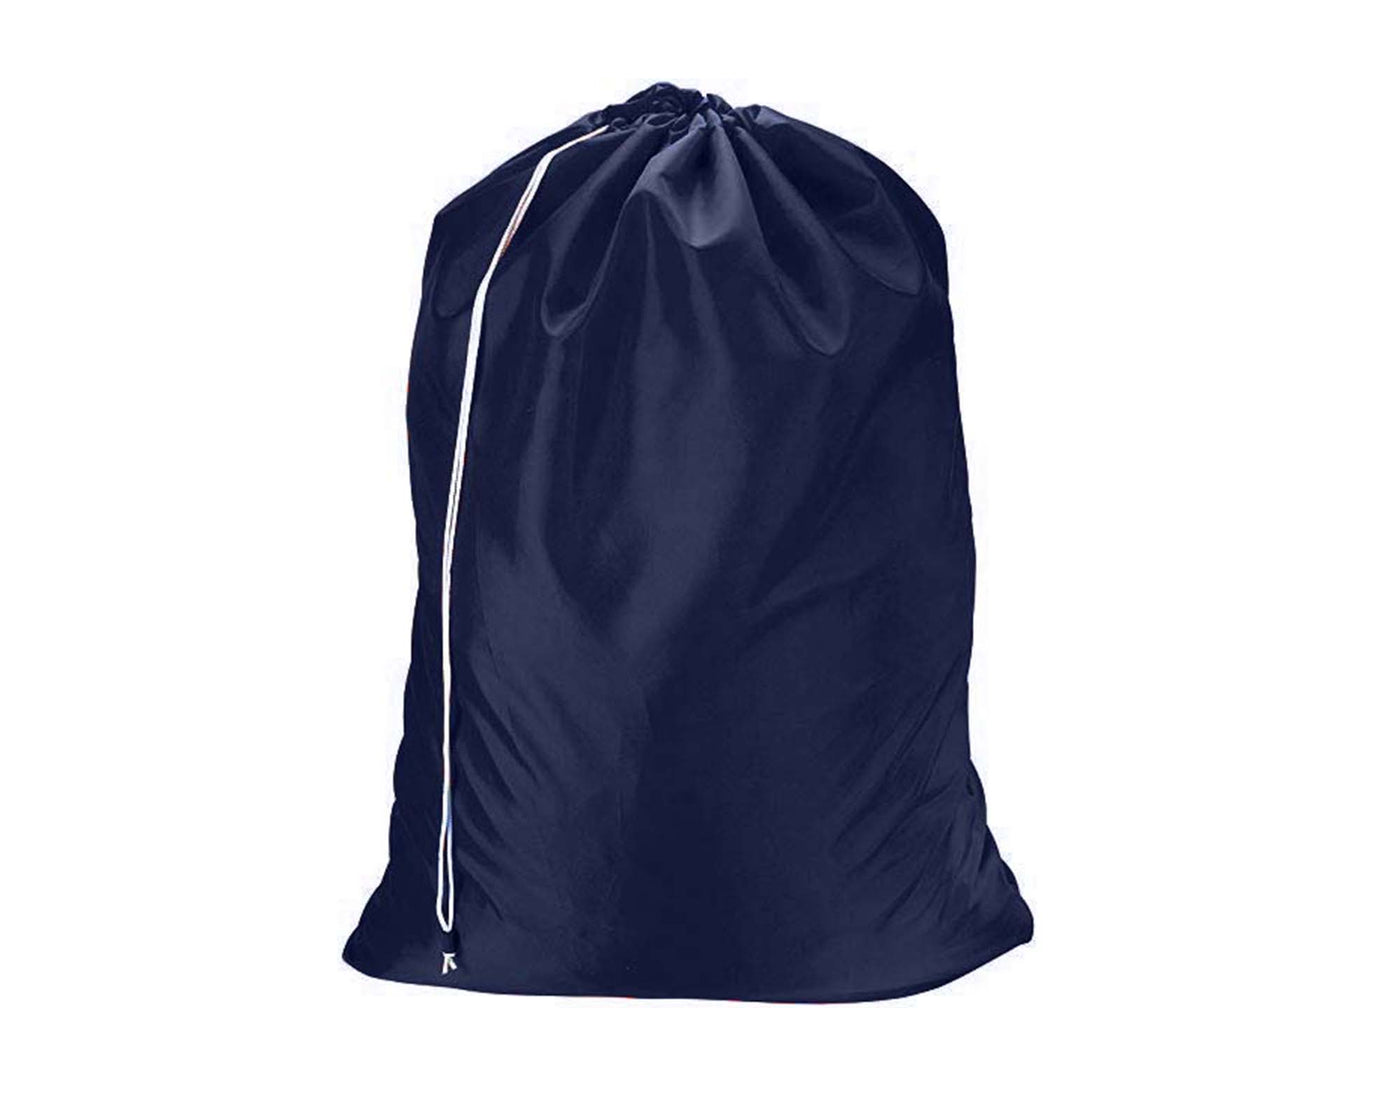 Industrial navy blue laundry bag with white draw string